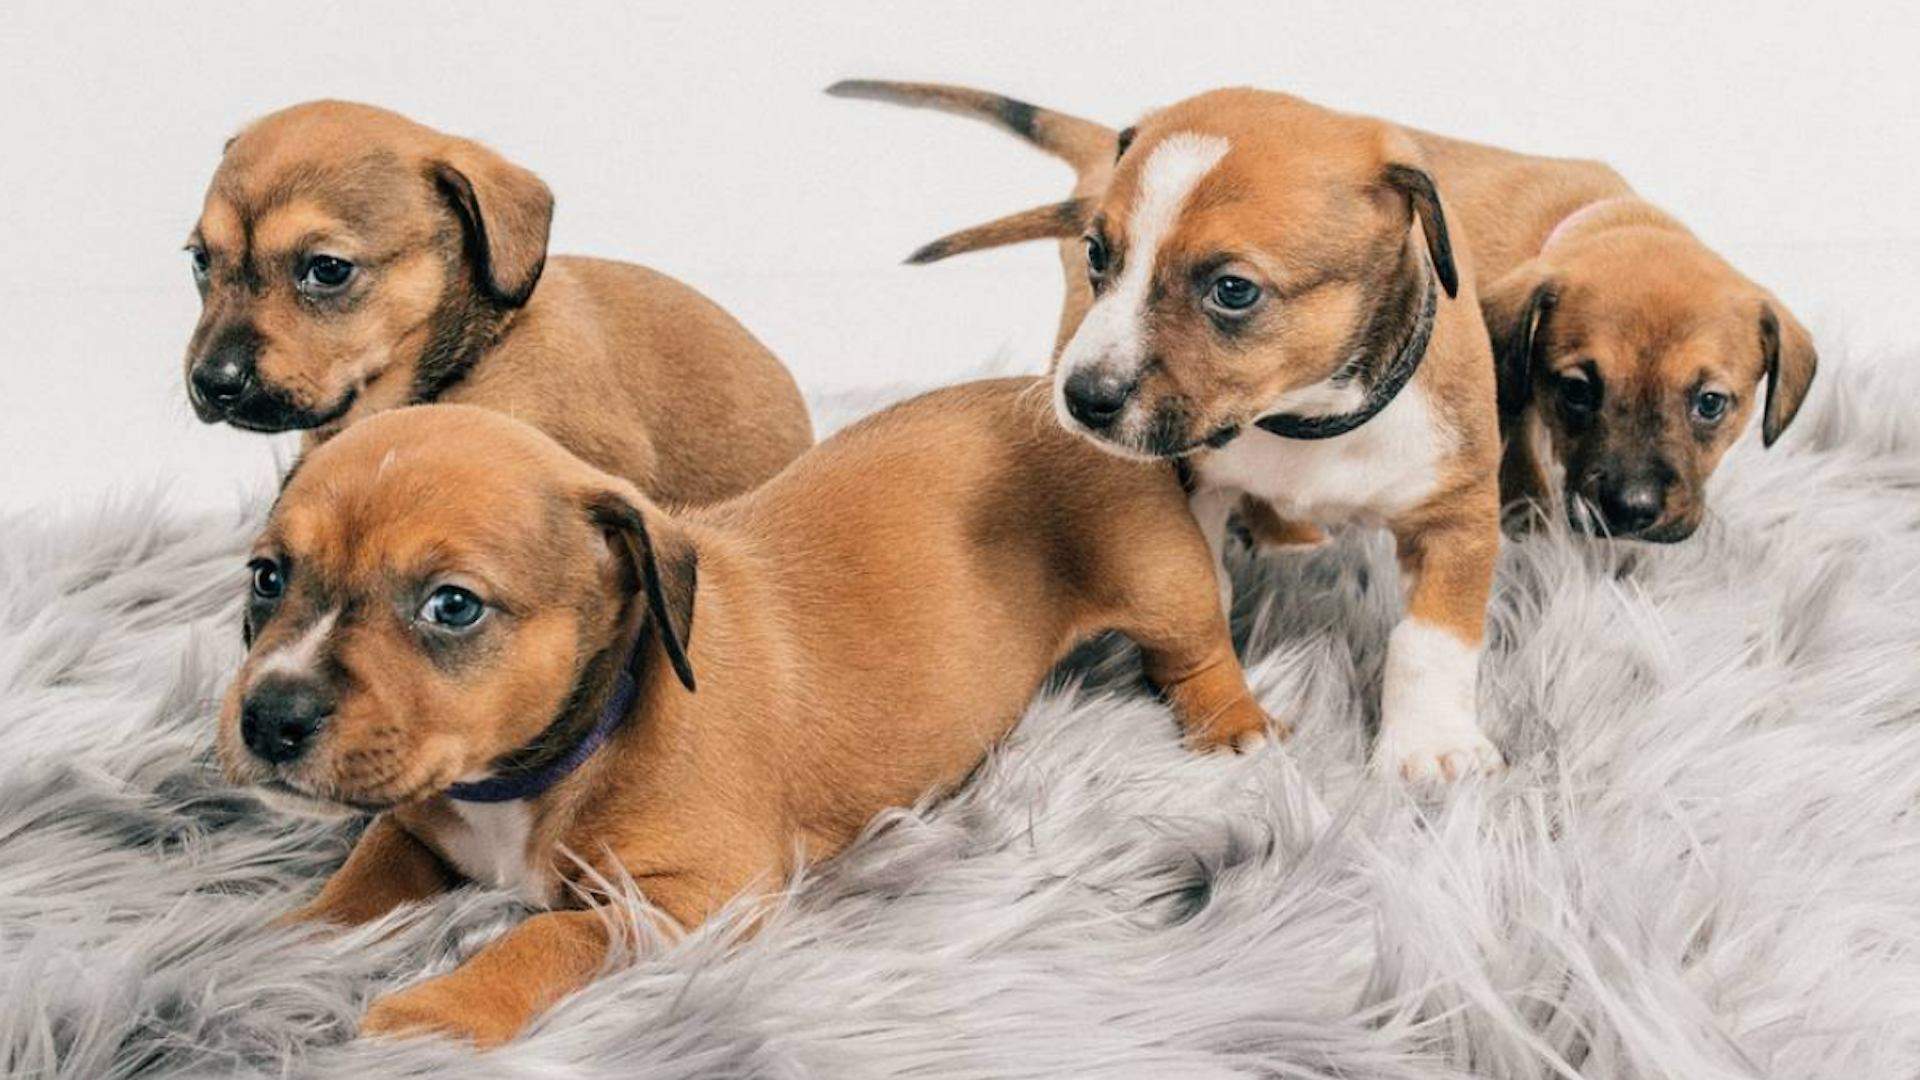 Ivory Coat Is Searching for 20 Adorable Dogs to Star in Its Next TV Commercial